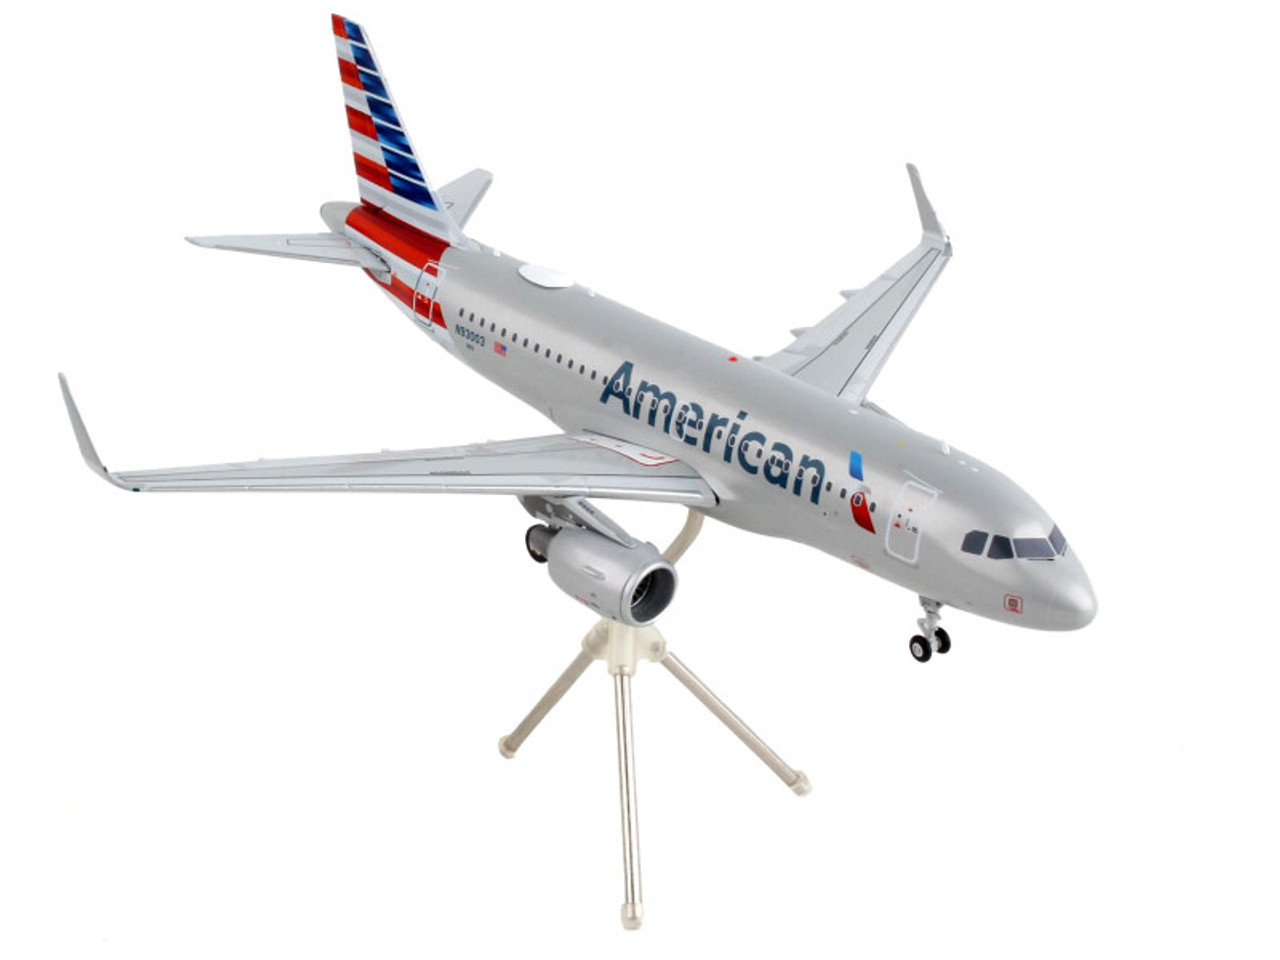 Airbus A319 Commercial Aircraft "American Airlines" Silver "Gemini 200" Series 1/200 Diecast Model Airplane by GeminiJets